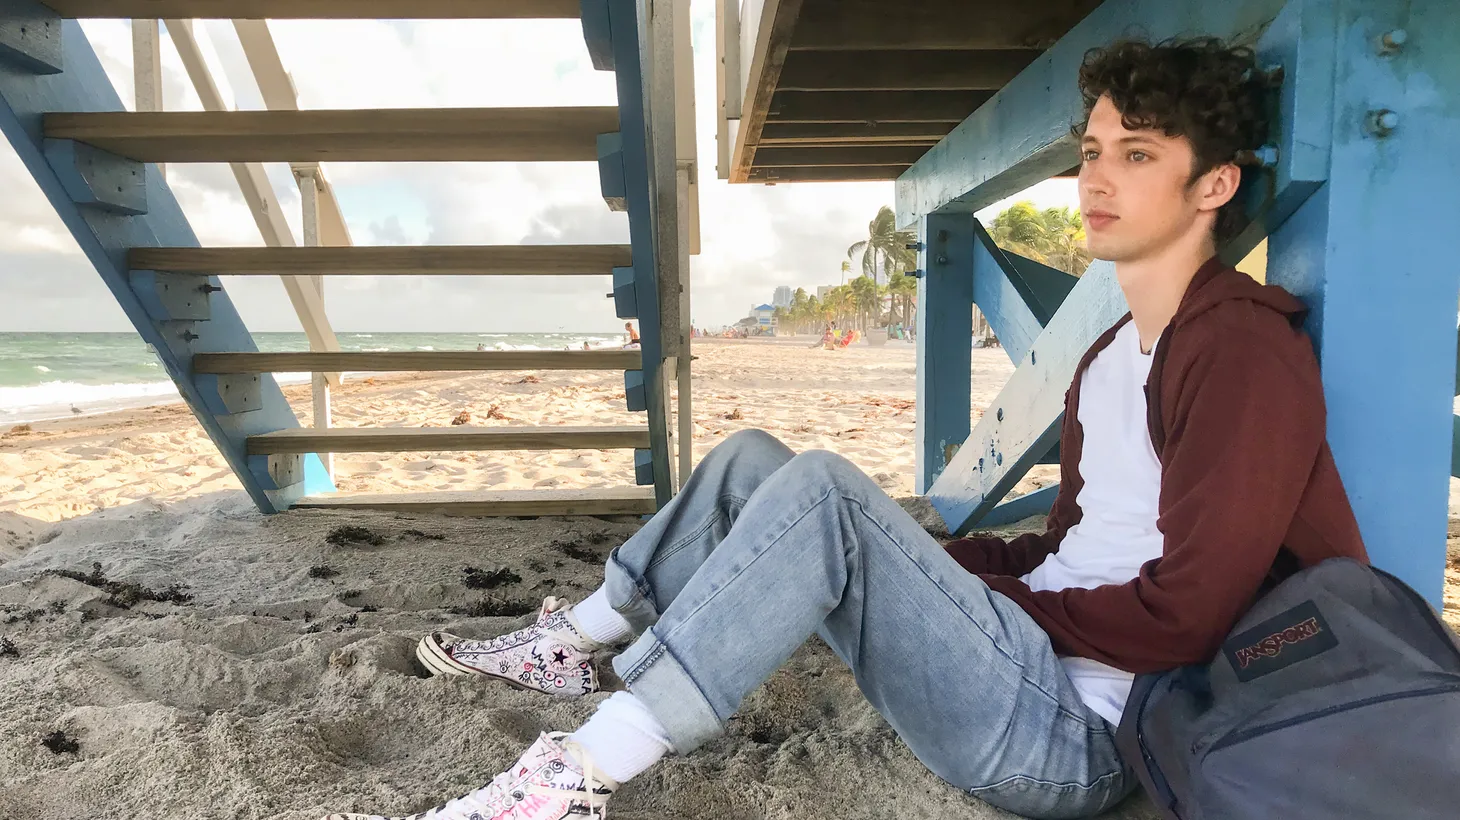 Troye Sivan plays Caleb in “Three Months,” written and directed by Jared Frieder. In the film, Caleb discovers he’s been exposed to HIV right before his high school graduation. “It was a story that I really thought needed to be told because we hadn’t seen it before,” Frieder says.